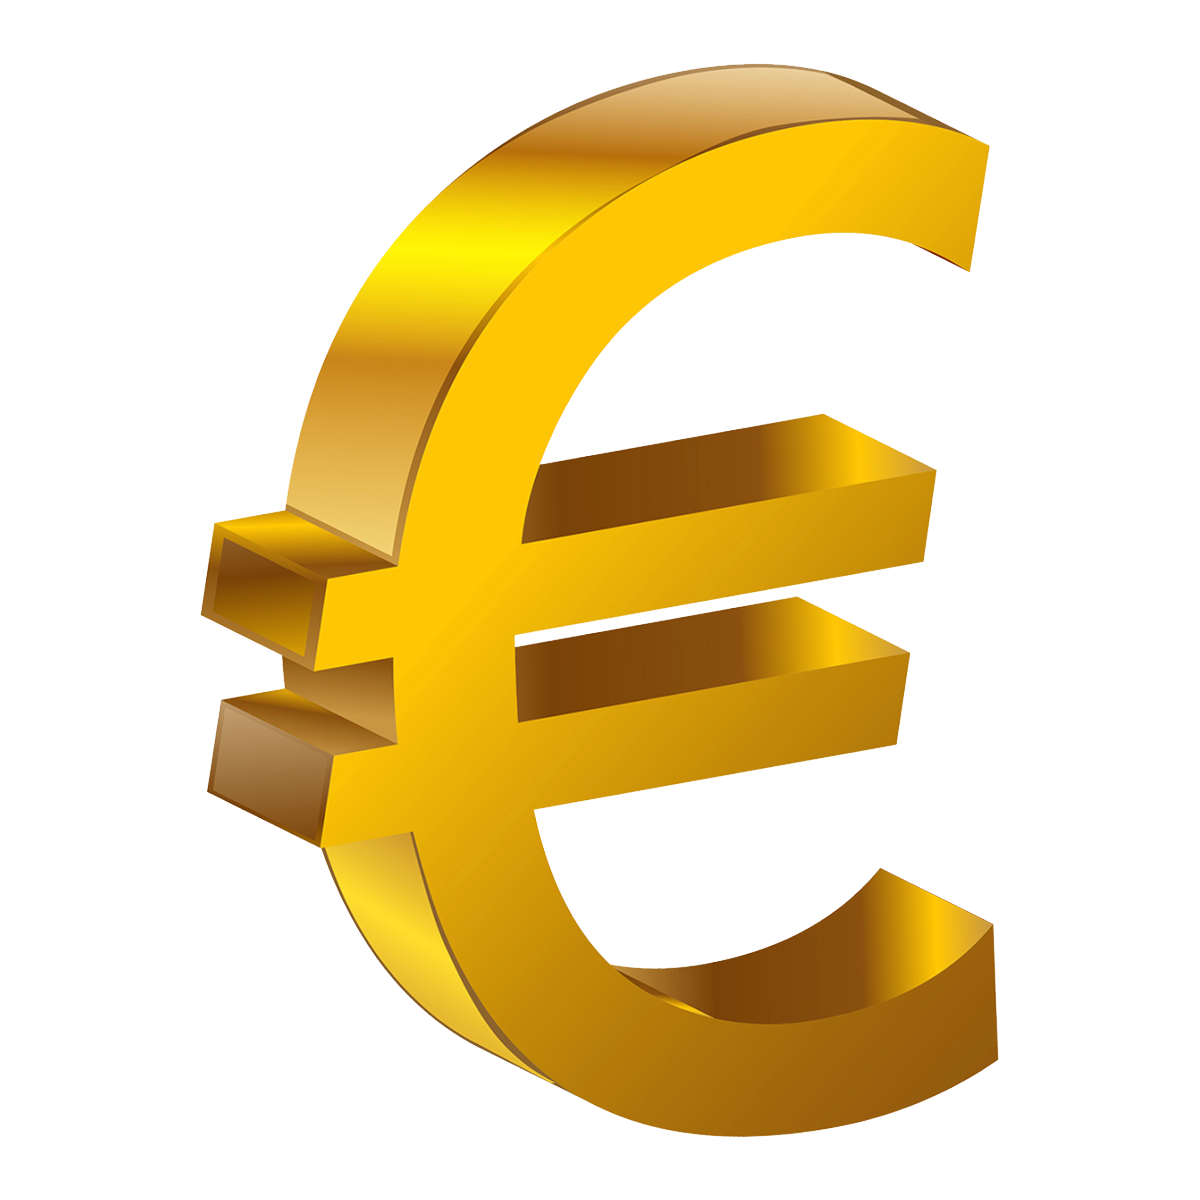 Euro Sign Transparent Gallery